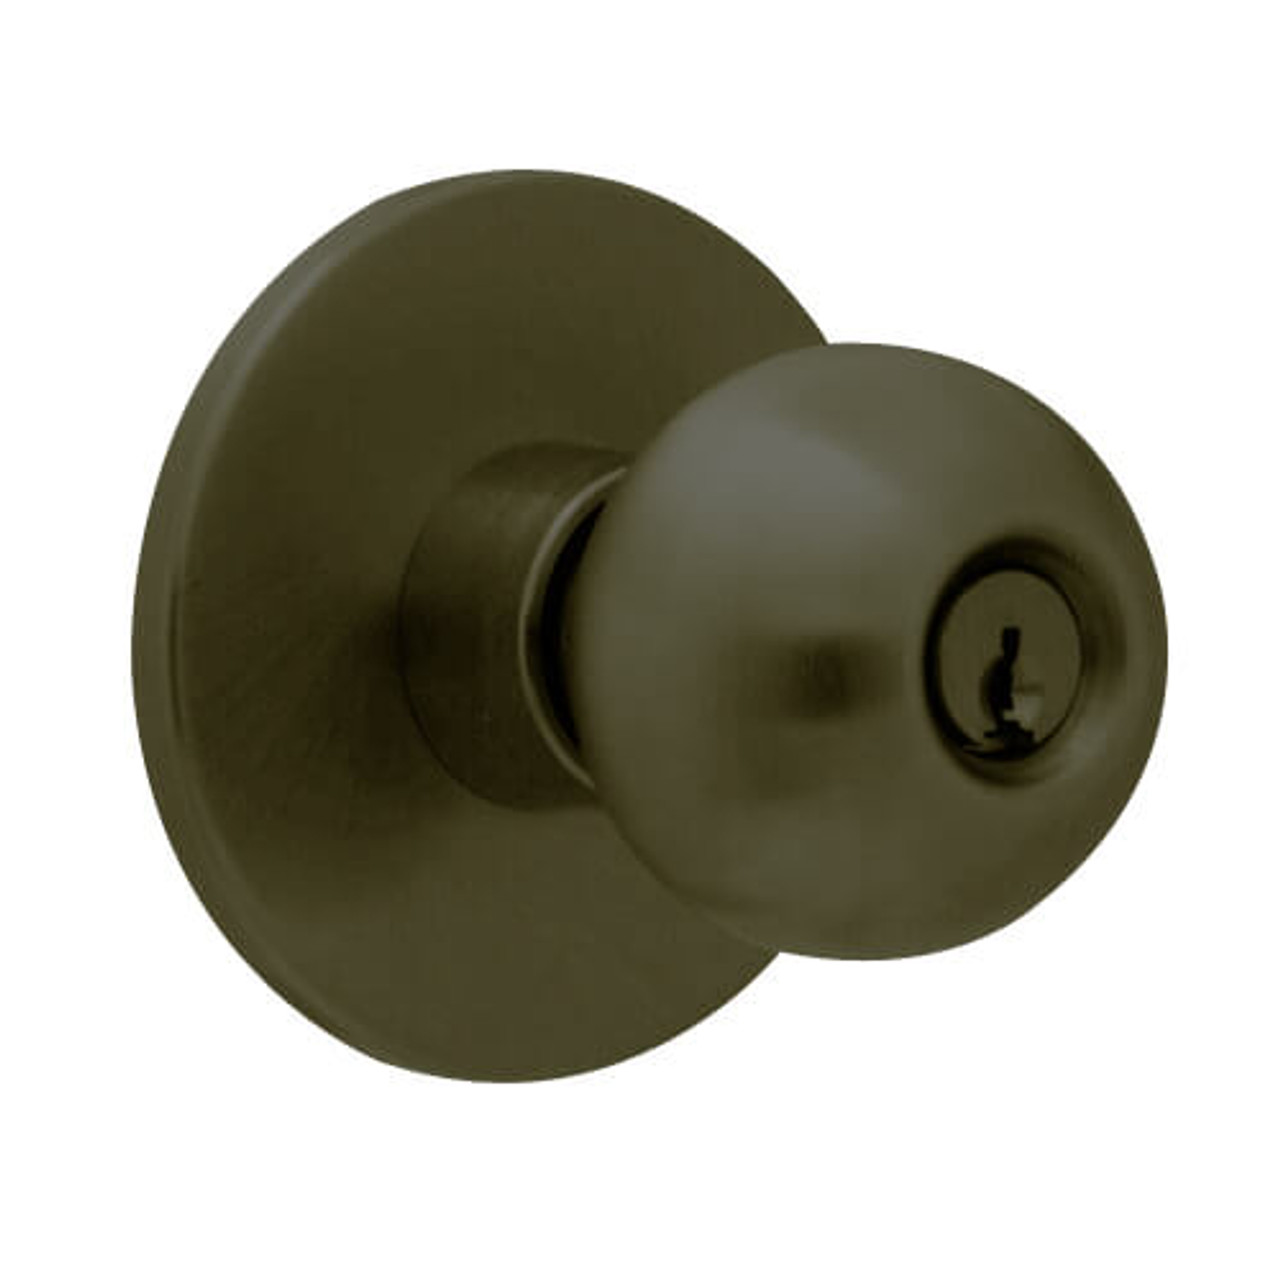 X521PD-HY-613 Falcon X Series Cylindrical Office Lock with Hana-York Knob Style in Oil Rubbed Bronze Finish